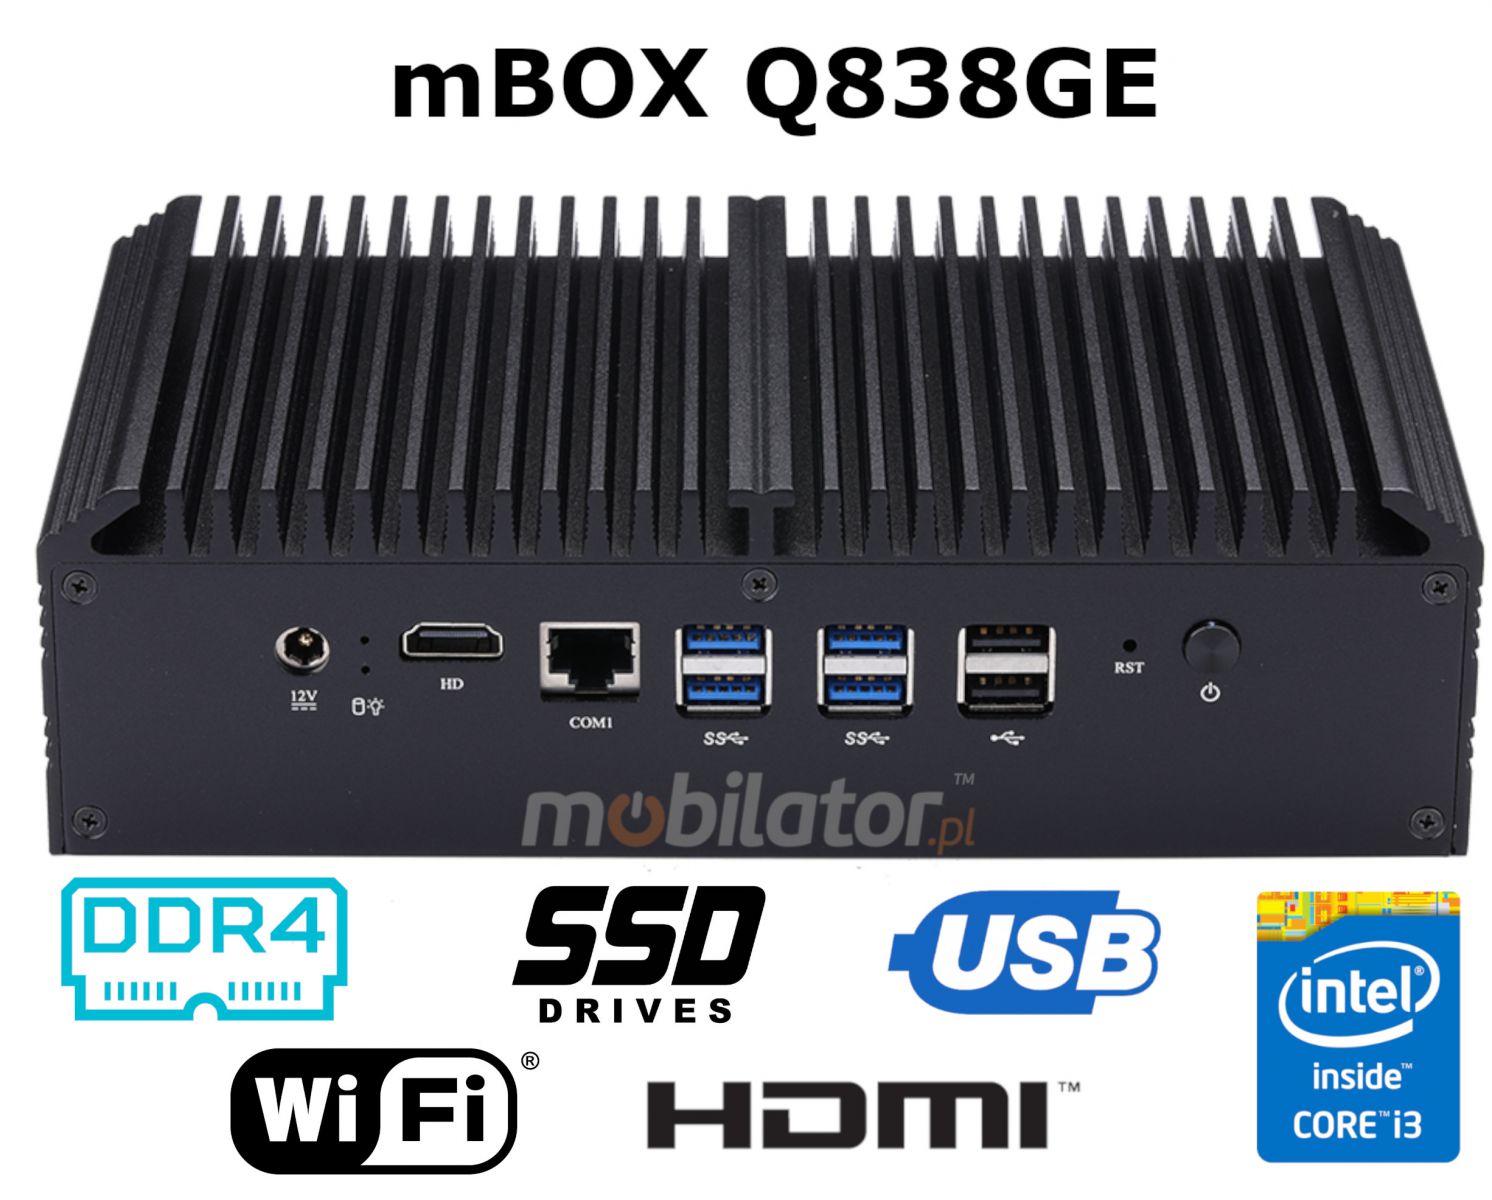 mBOX Q838GE v. 3 with 256GB SSD capacity and 8GB RAM